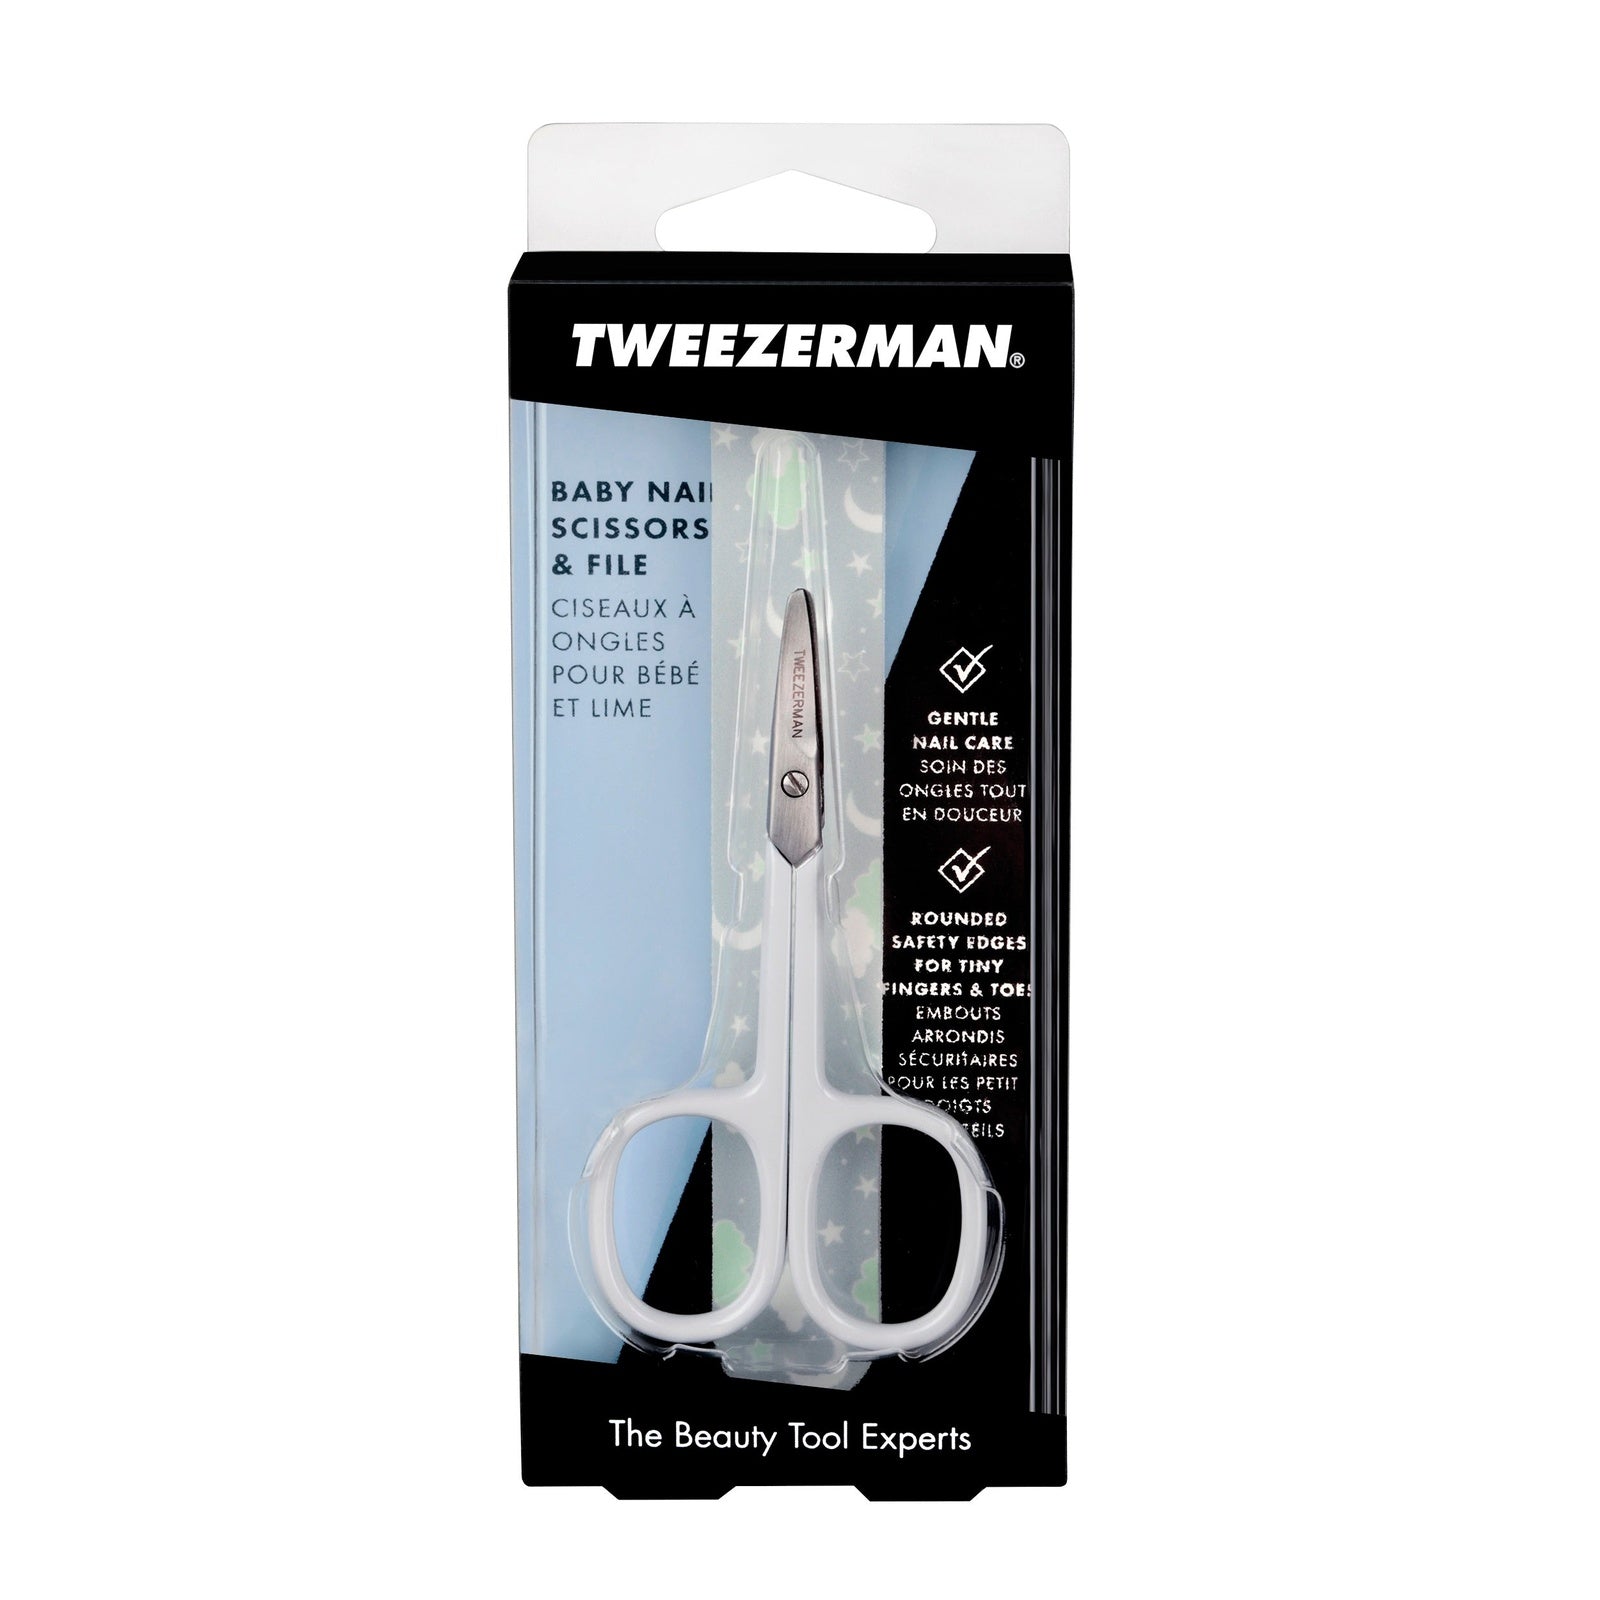 Face Body and – File Baby With Tweezerman Shoppe Nail Scissors